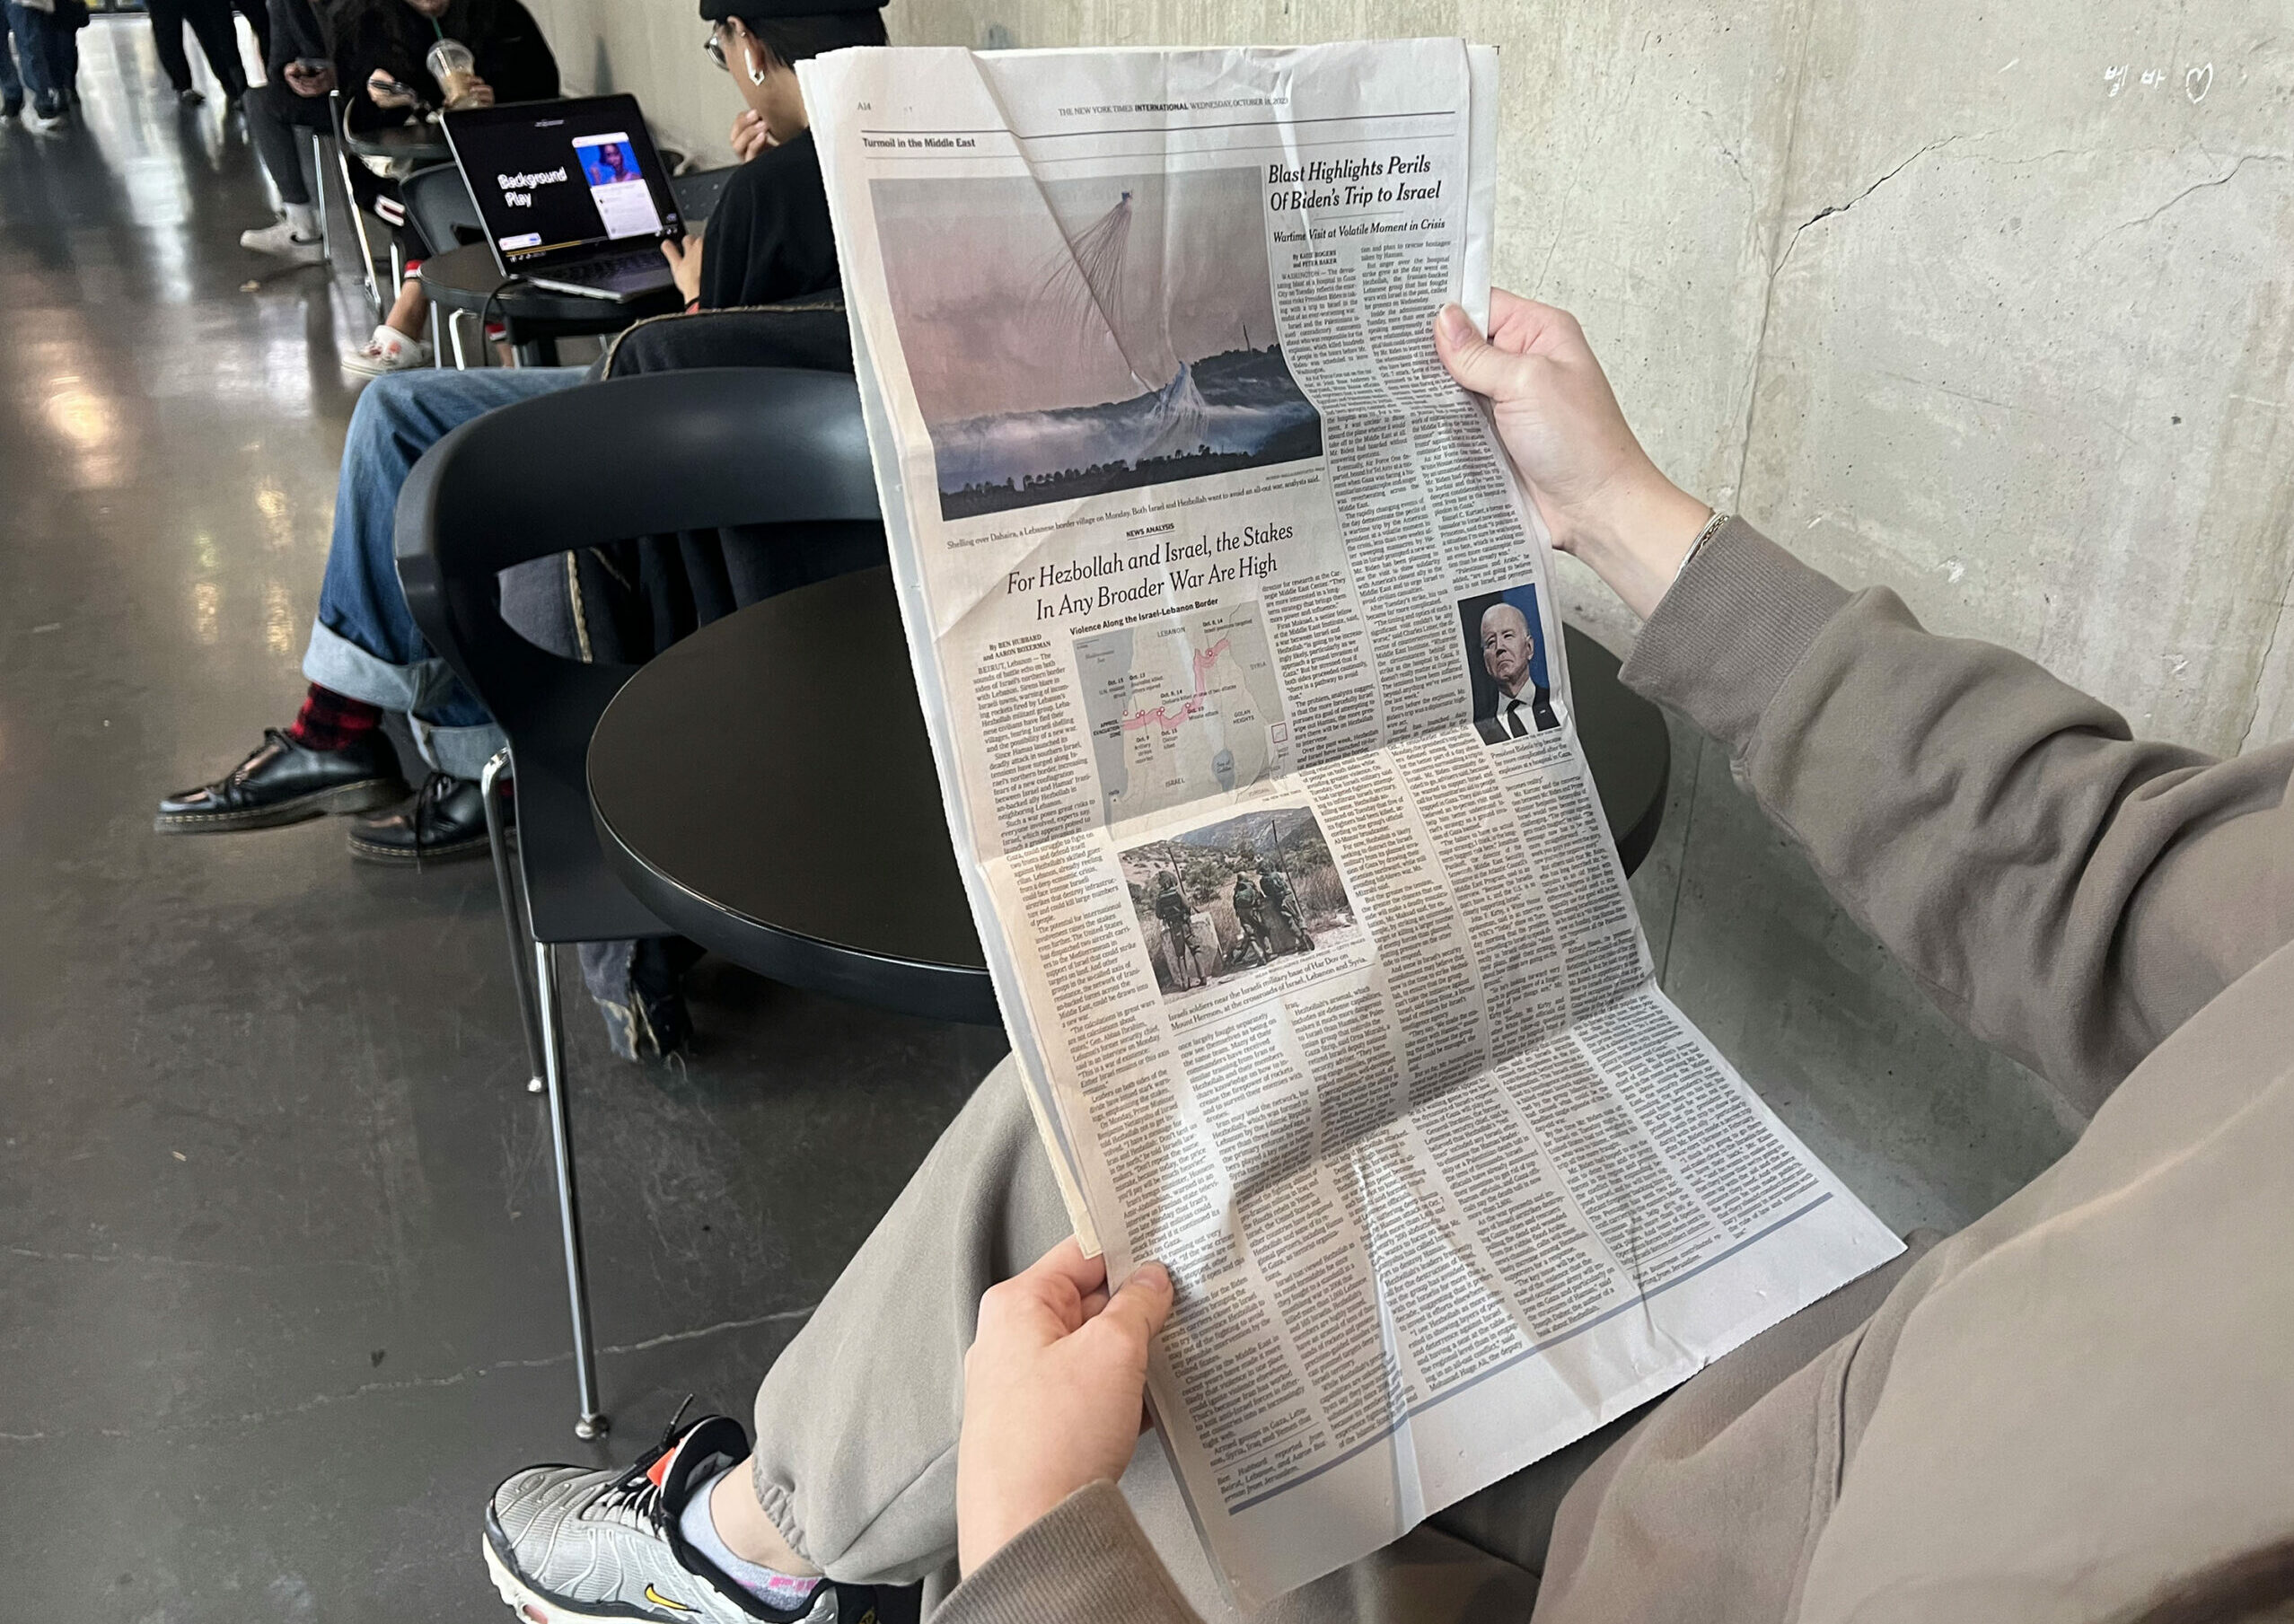 A newspaper is being held by a person sitting down.